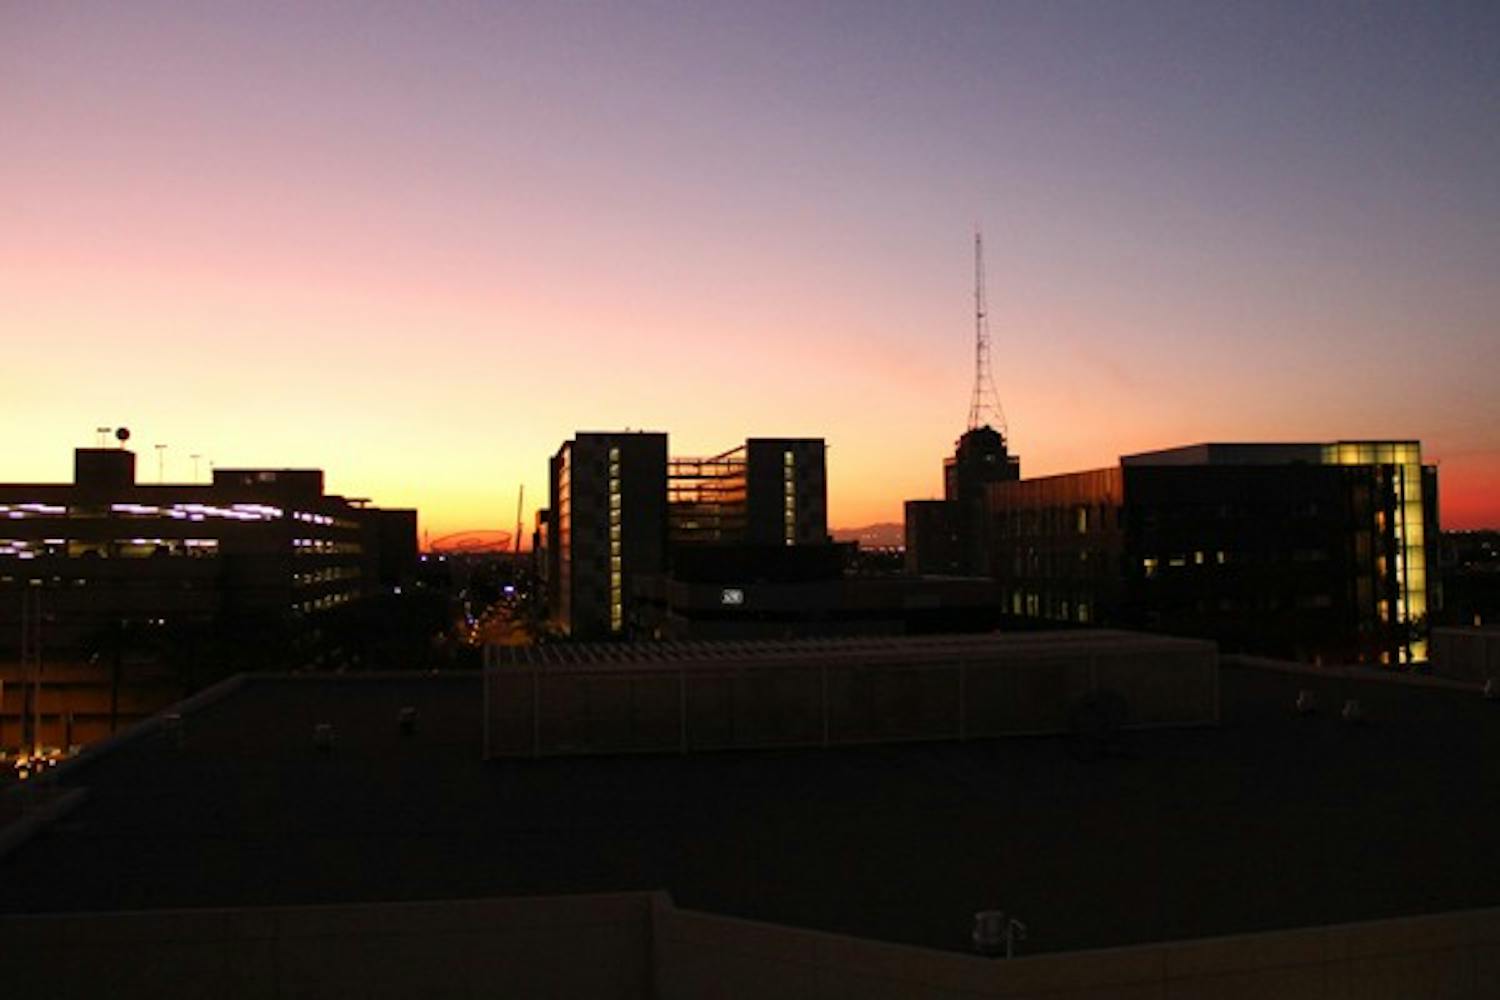 The ASU Downtown campus is silhouetted during sunset Wednesday evening. (Photo by Diana Lustig)